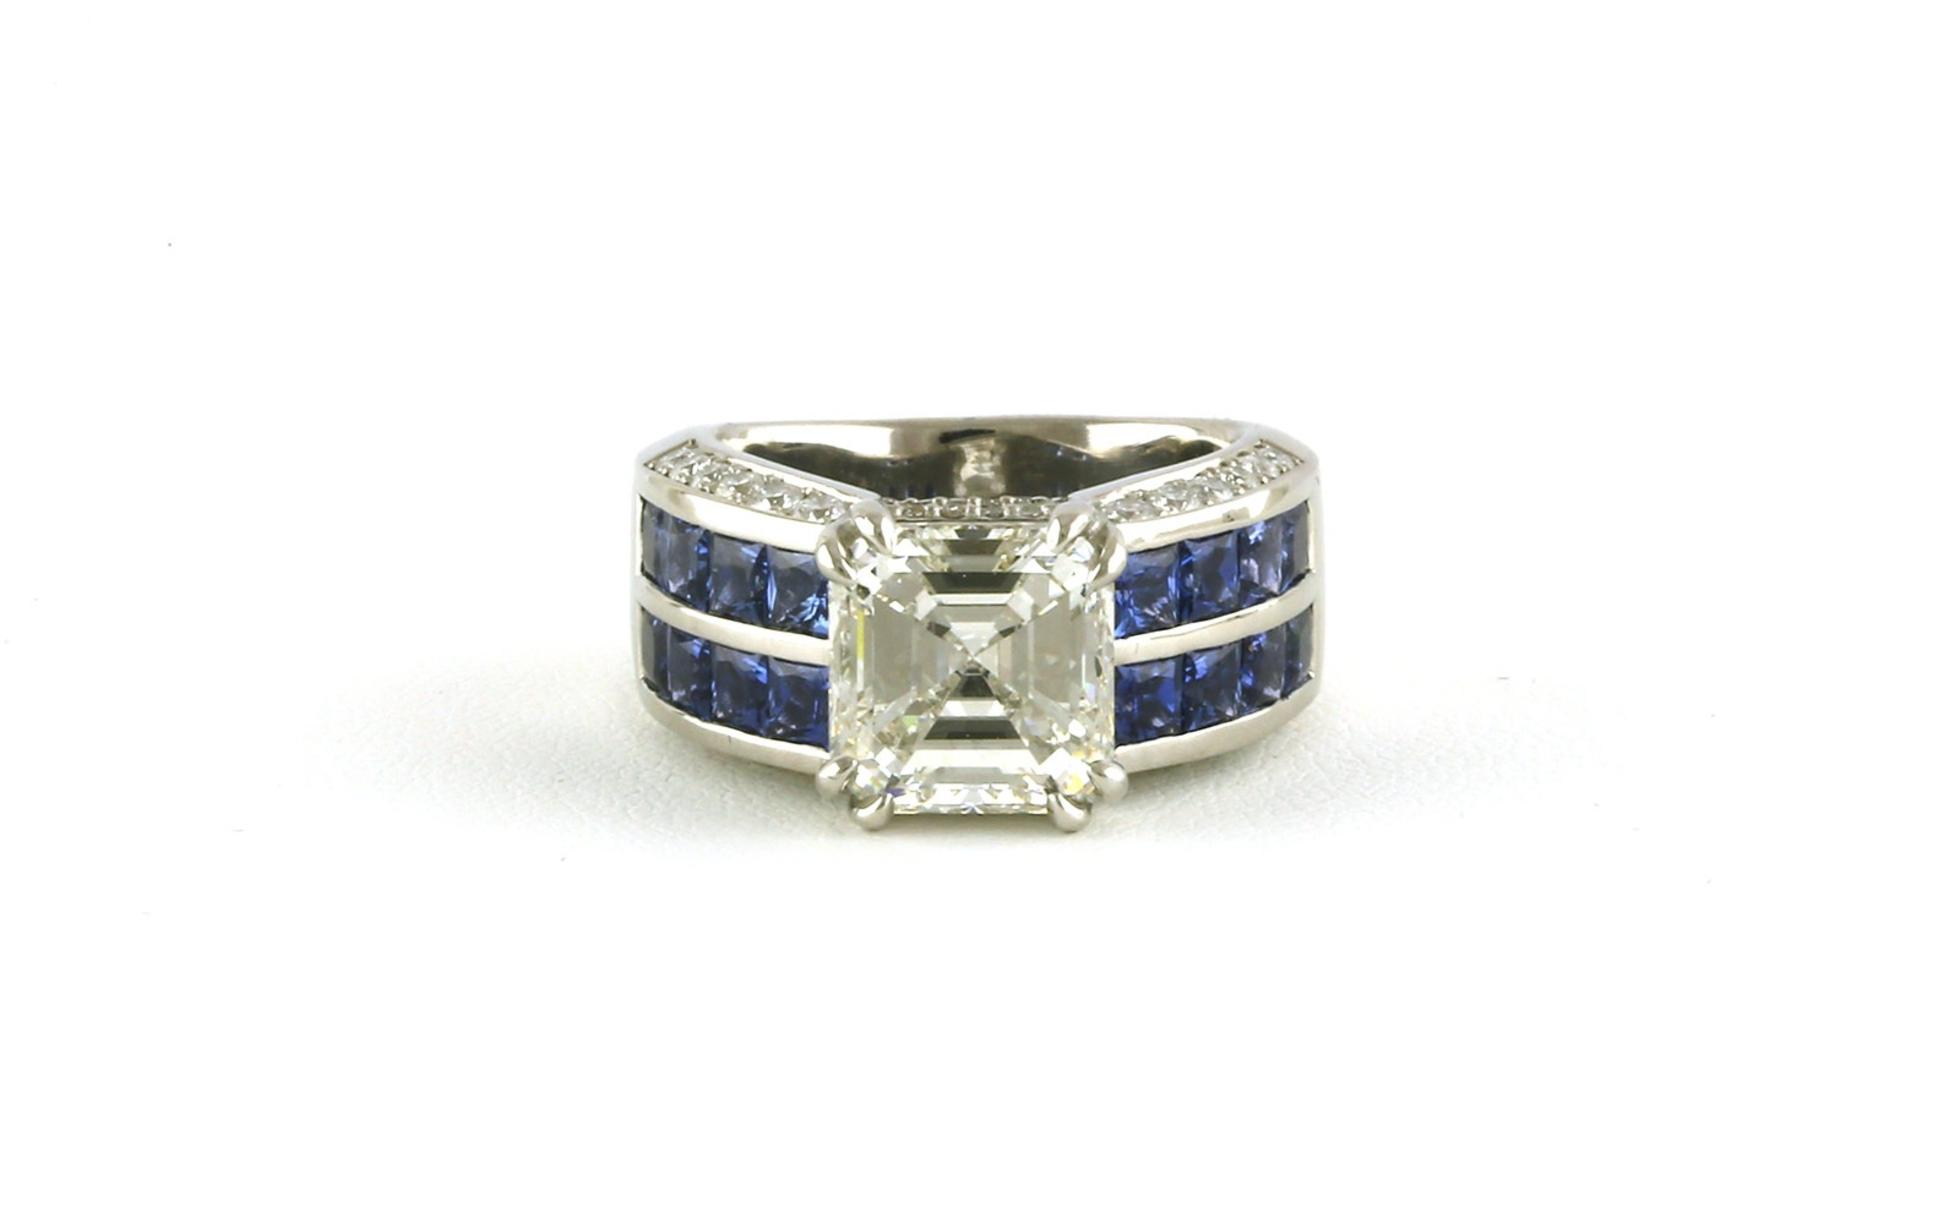 Wide Square Emerald-cut Diamond and 2 Row Channel-set Montana Yogo Sapphire Ring in Platinum (7.89cts TWT)